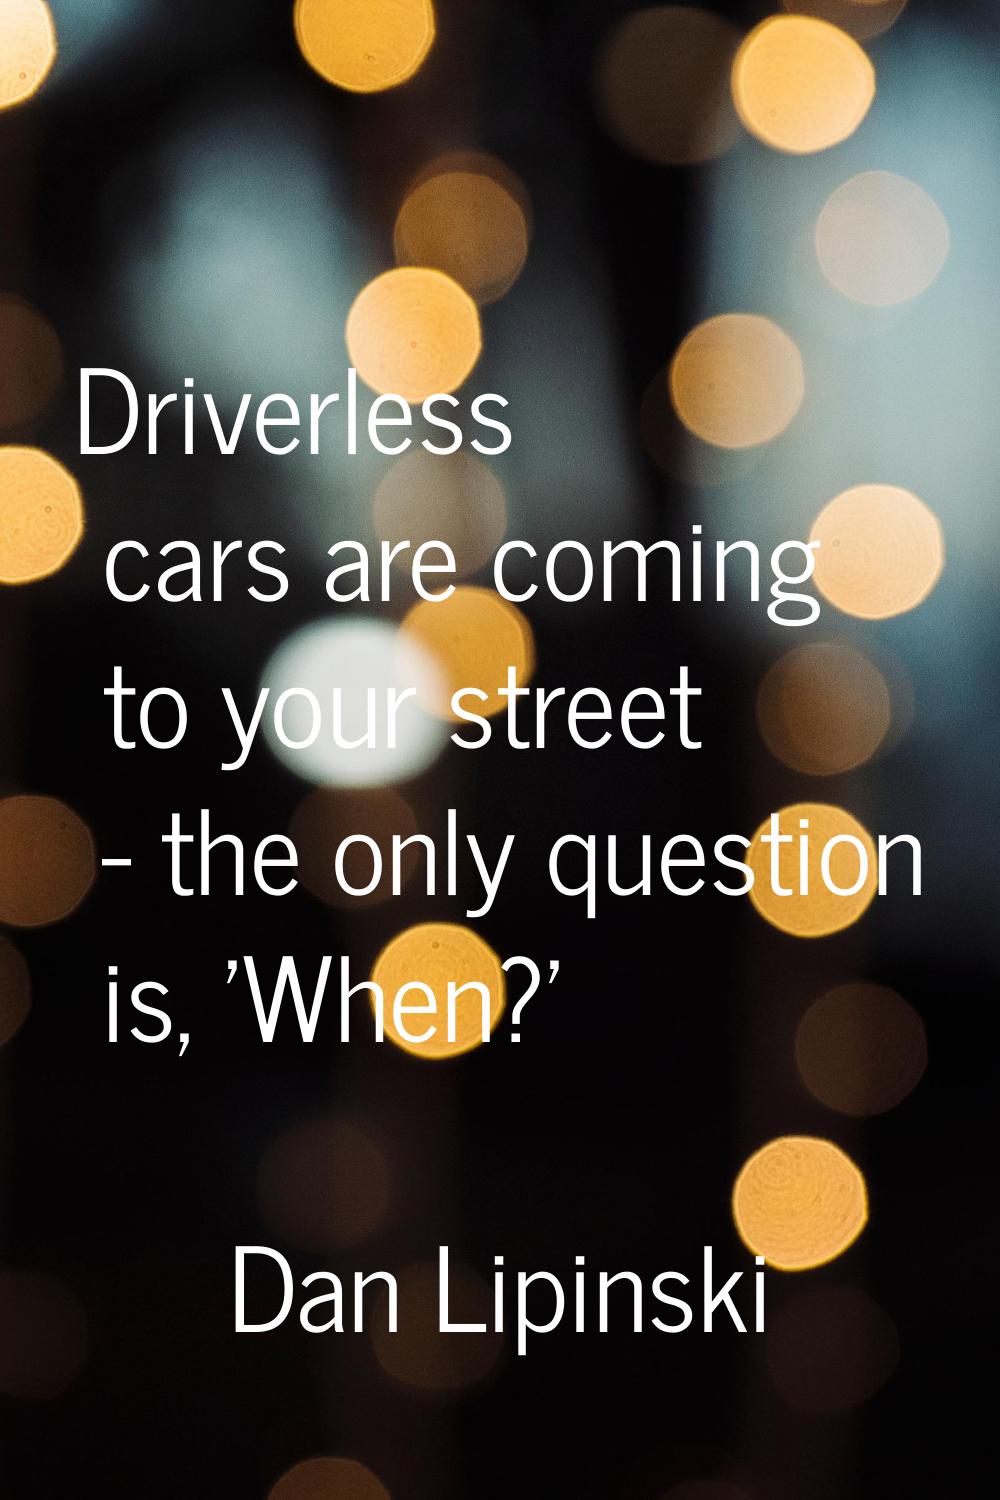 Driverless cars are coming to your street - the only question is, 'When?'